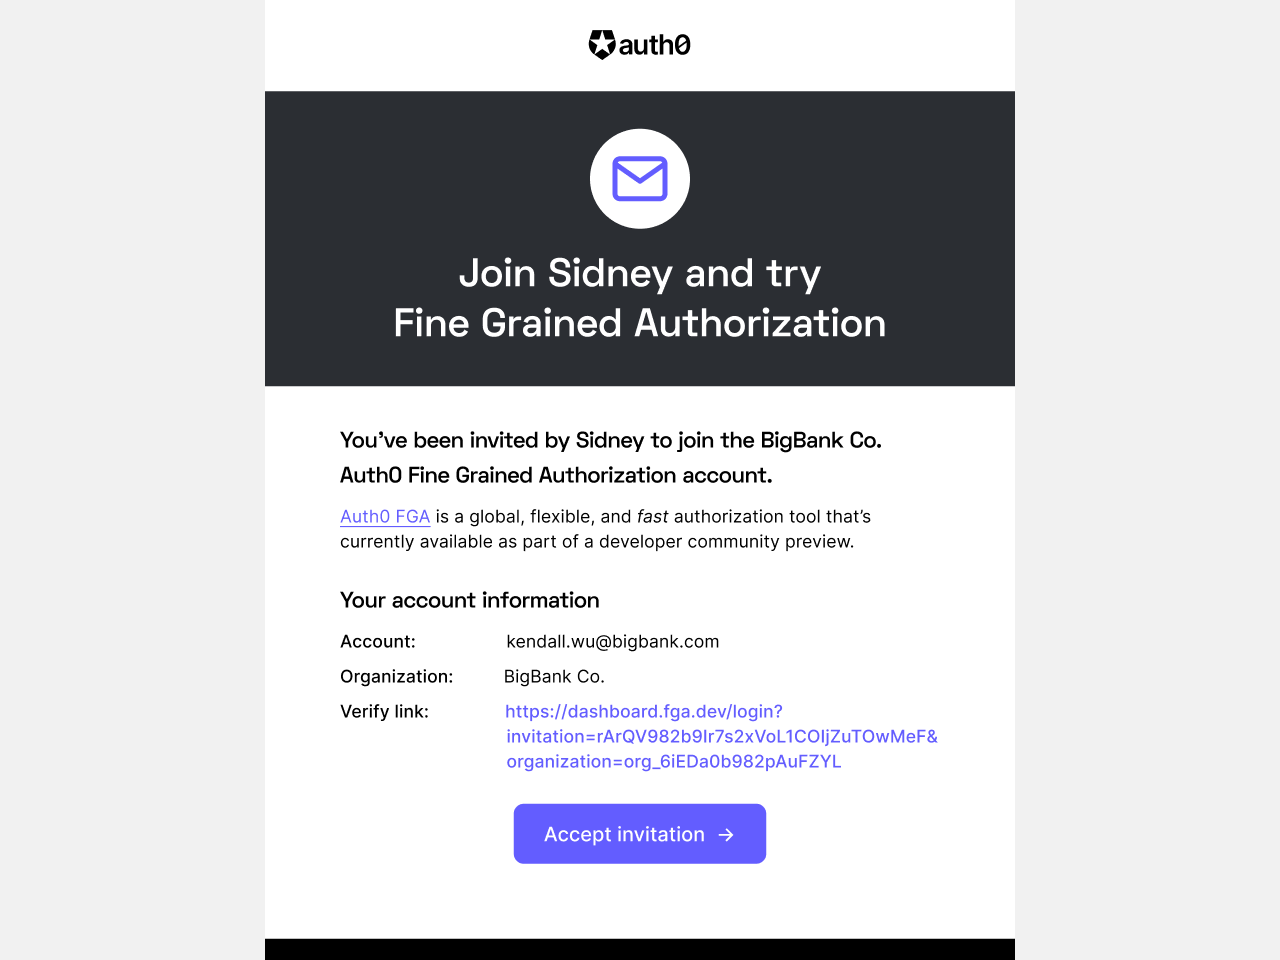 Image showing email invitation